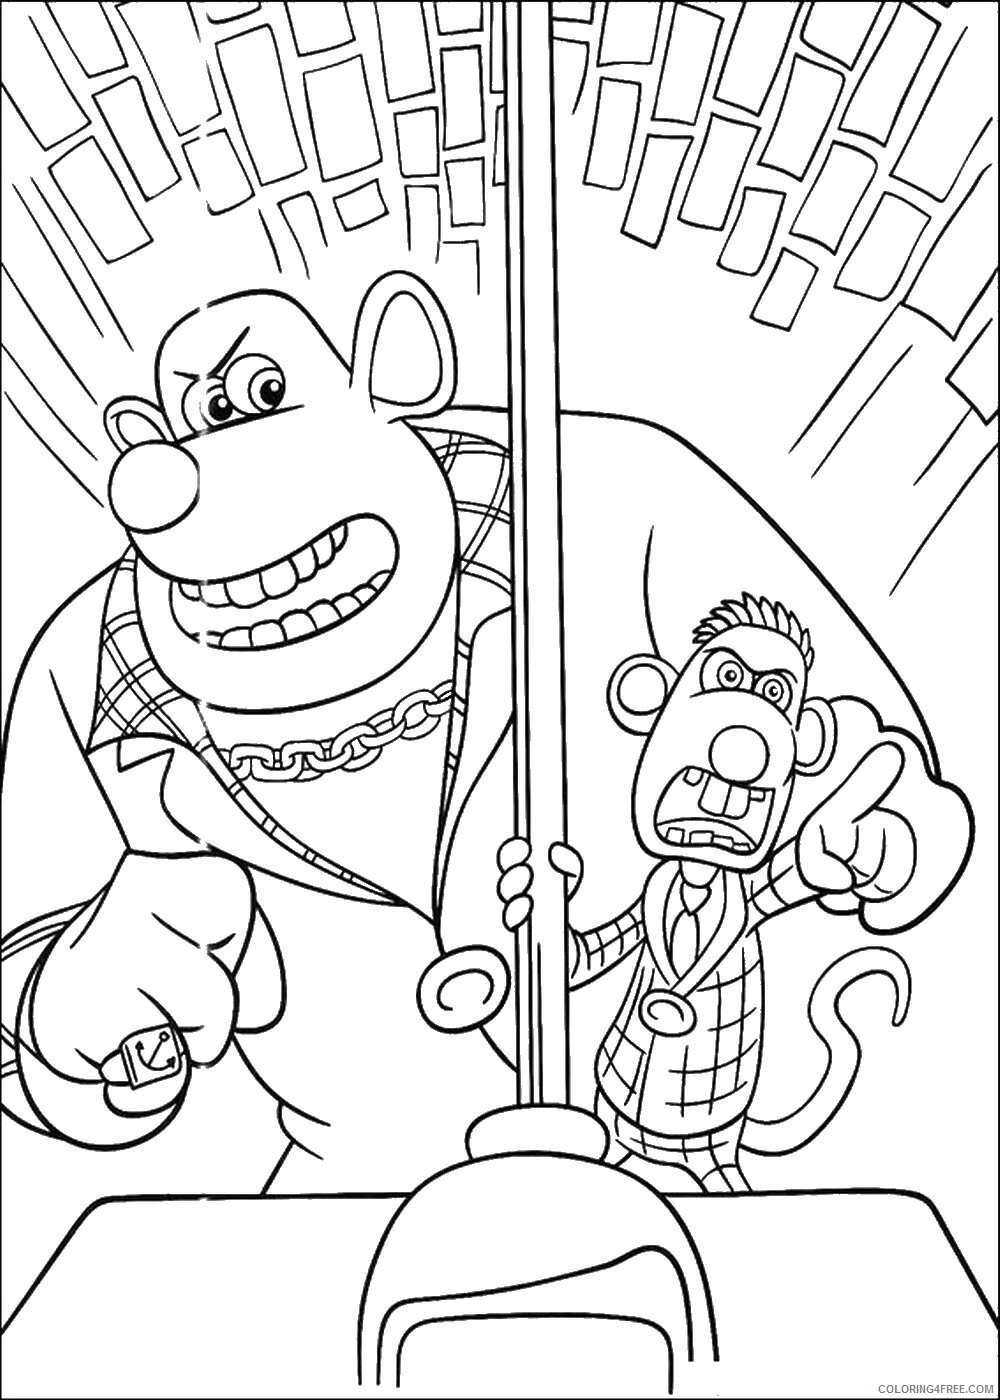 Flushed Away Coloring Pages TV Film flushed_cl_12 Printable 2020 02971 Coloring4free